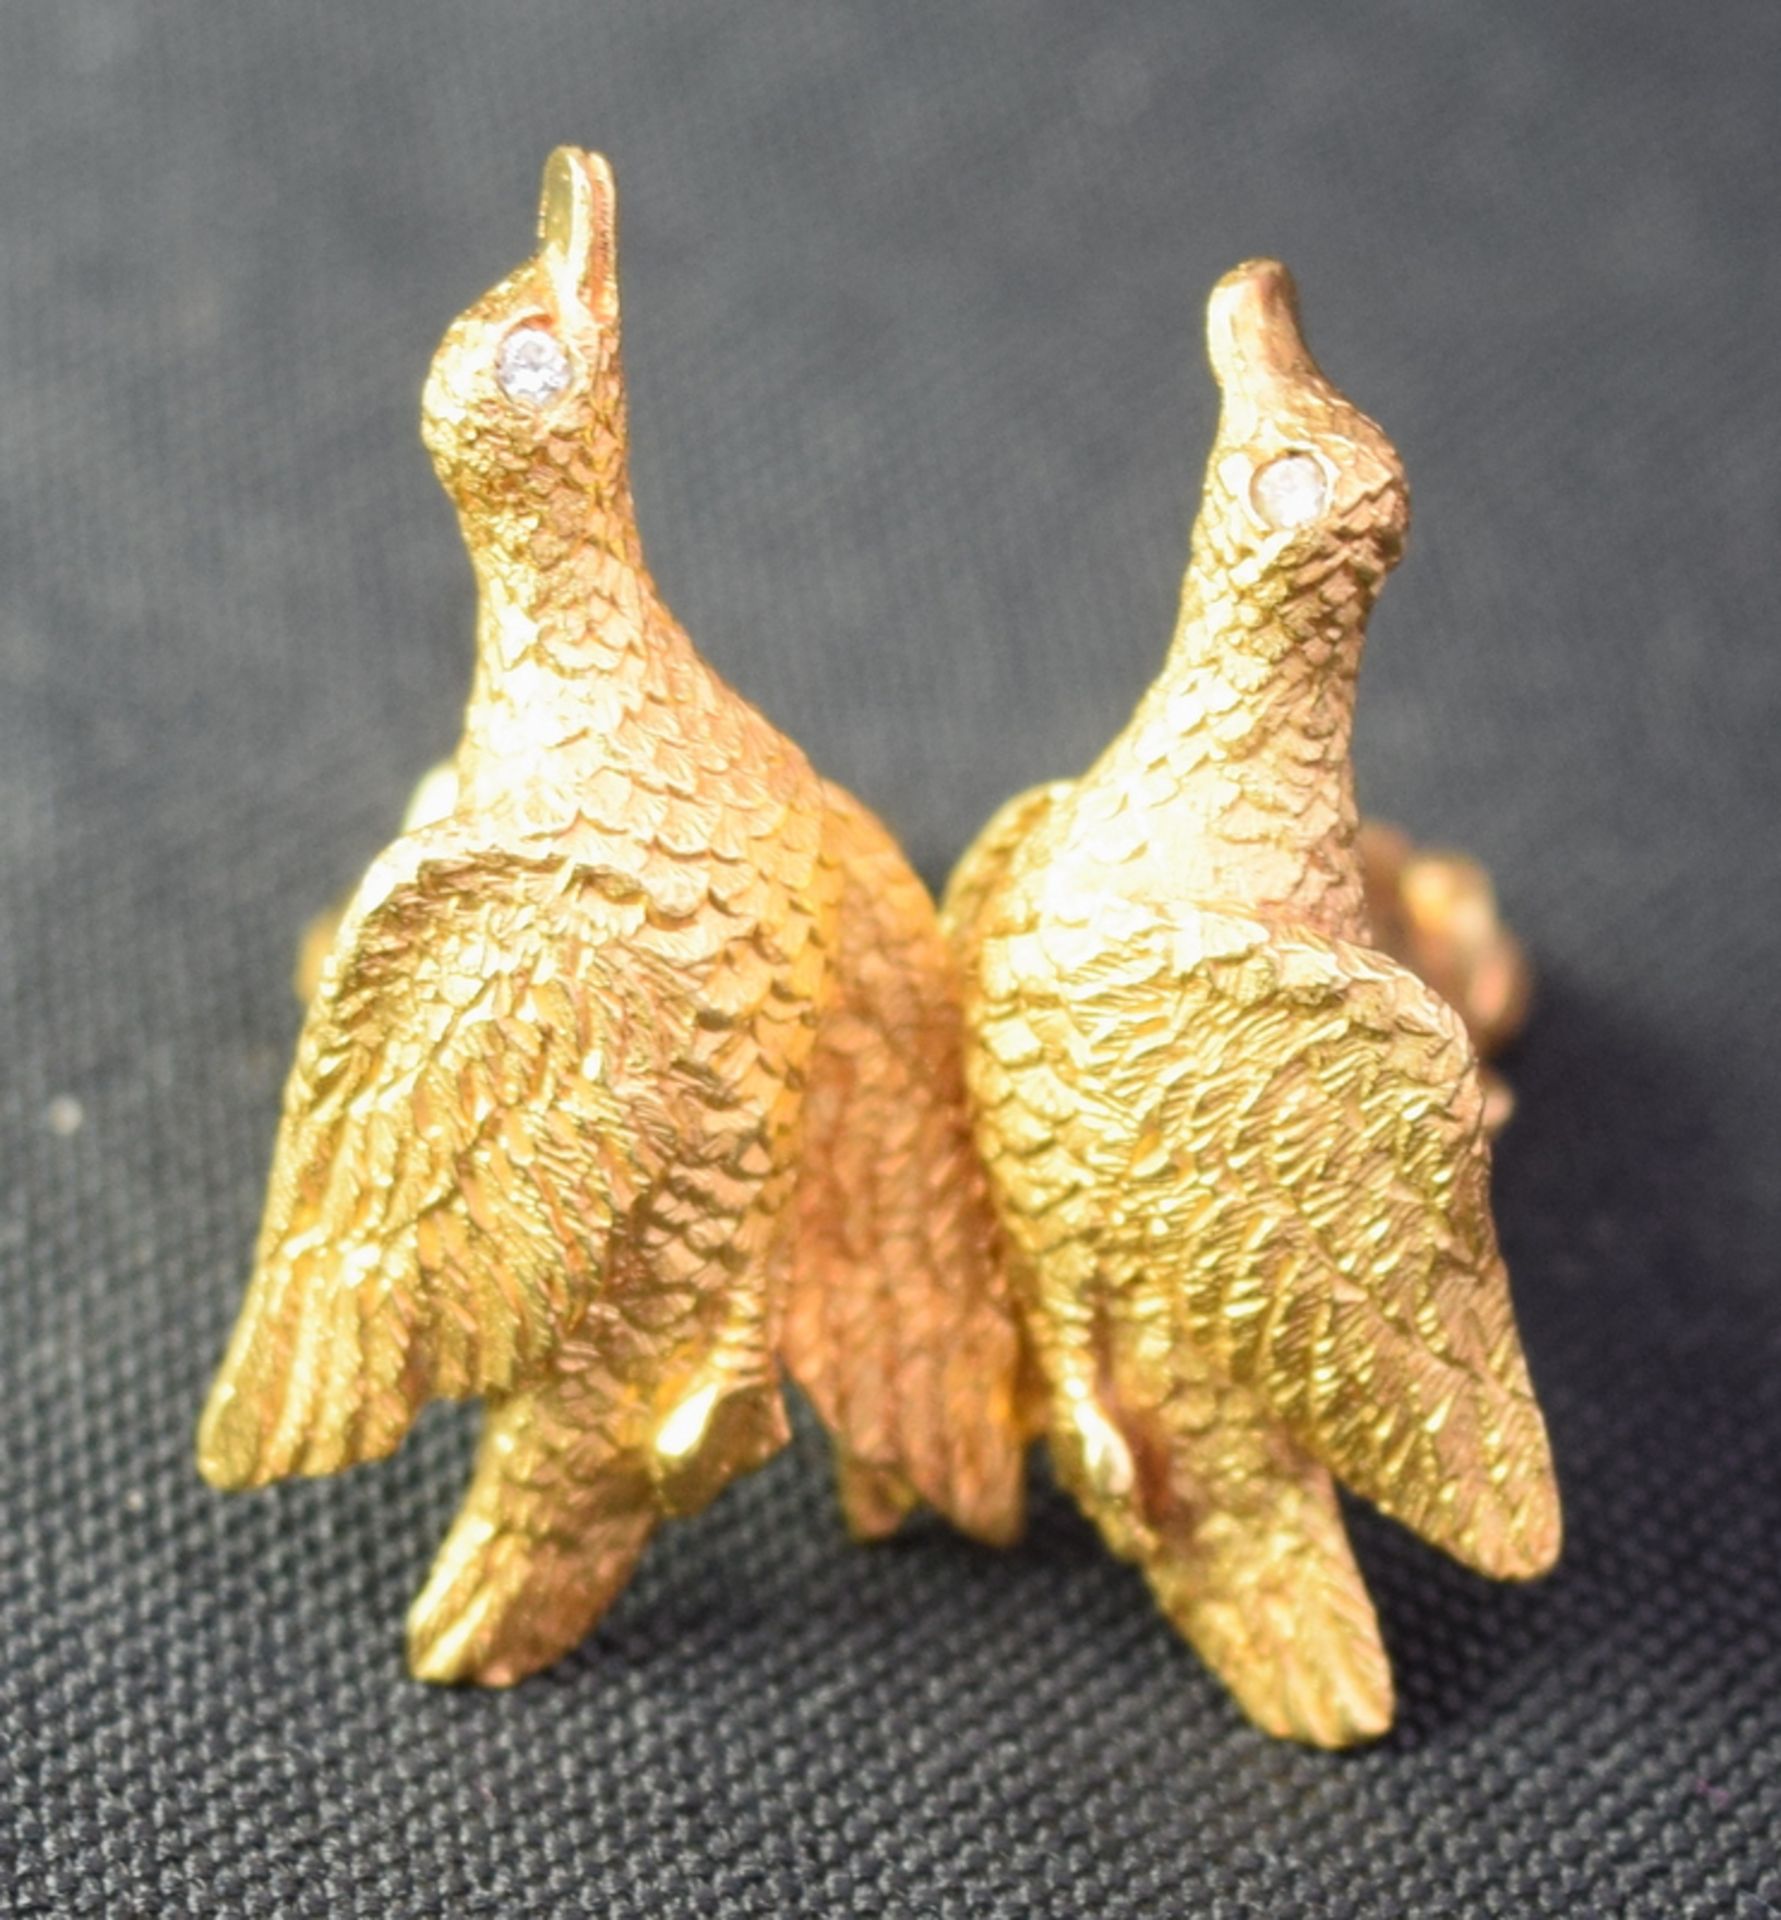 Exquisite Pair Of 18ct Gold Tiffany Cufflinks - Image 3 of 6